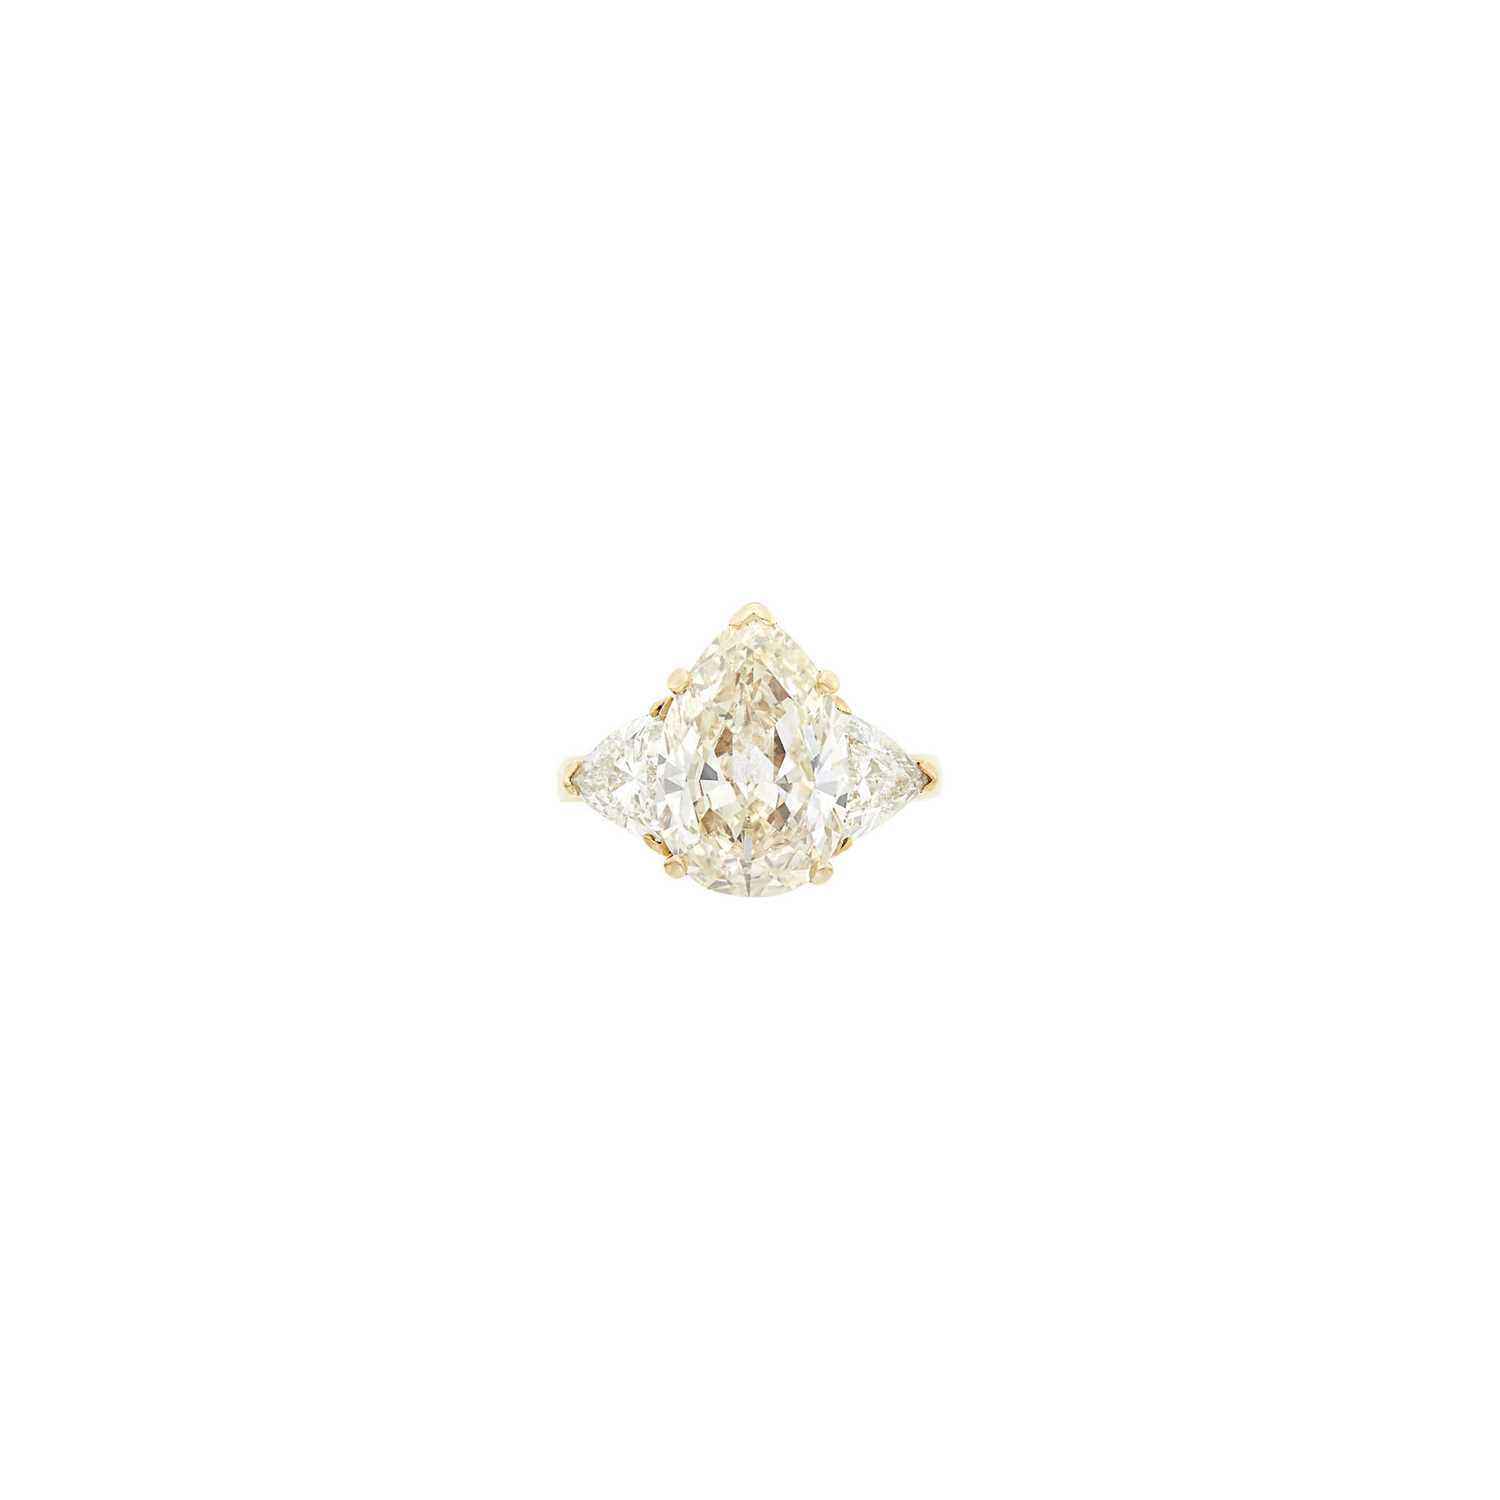 Lot 17 - Gold and Diamond Ring